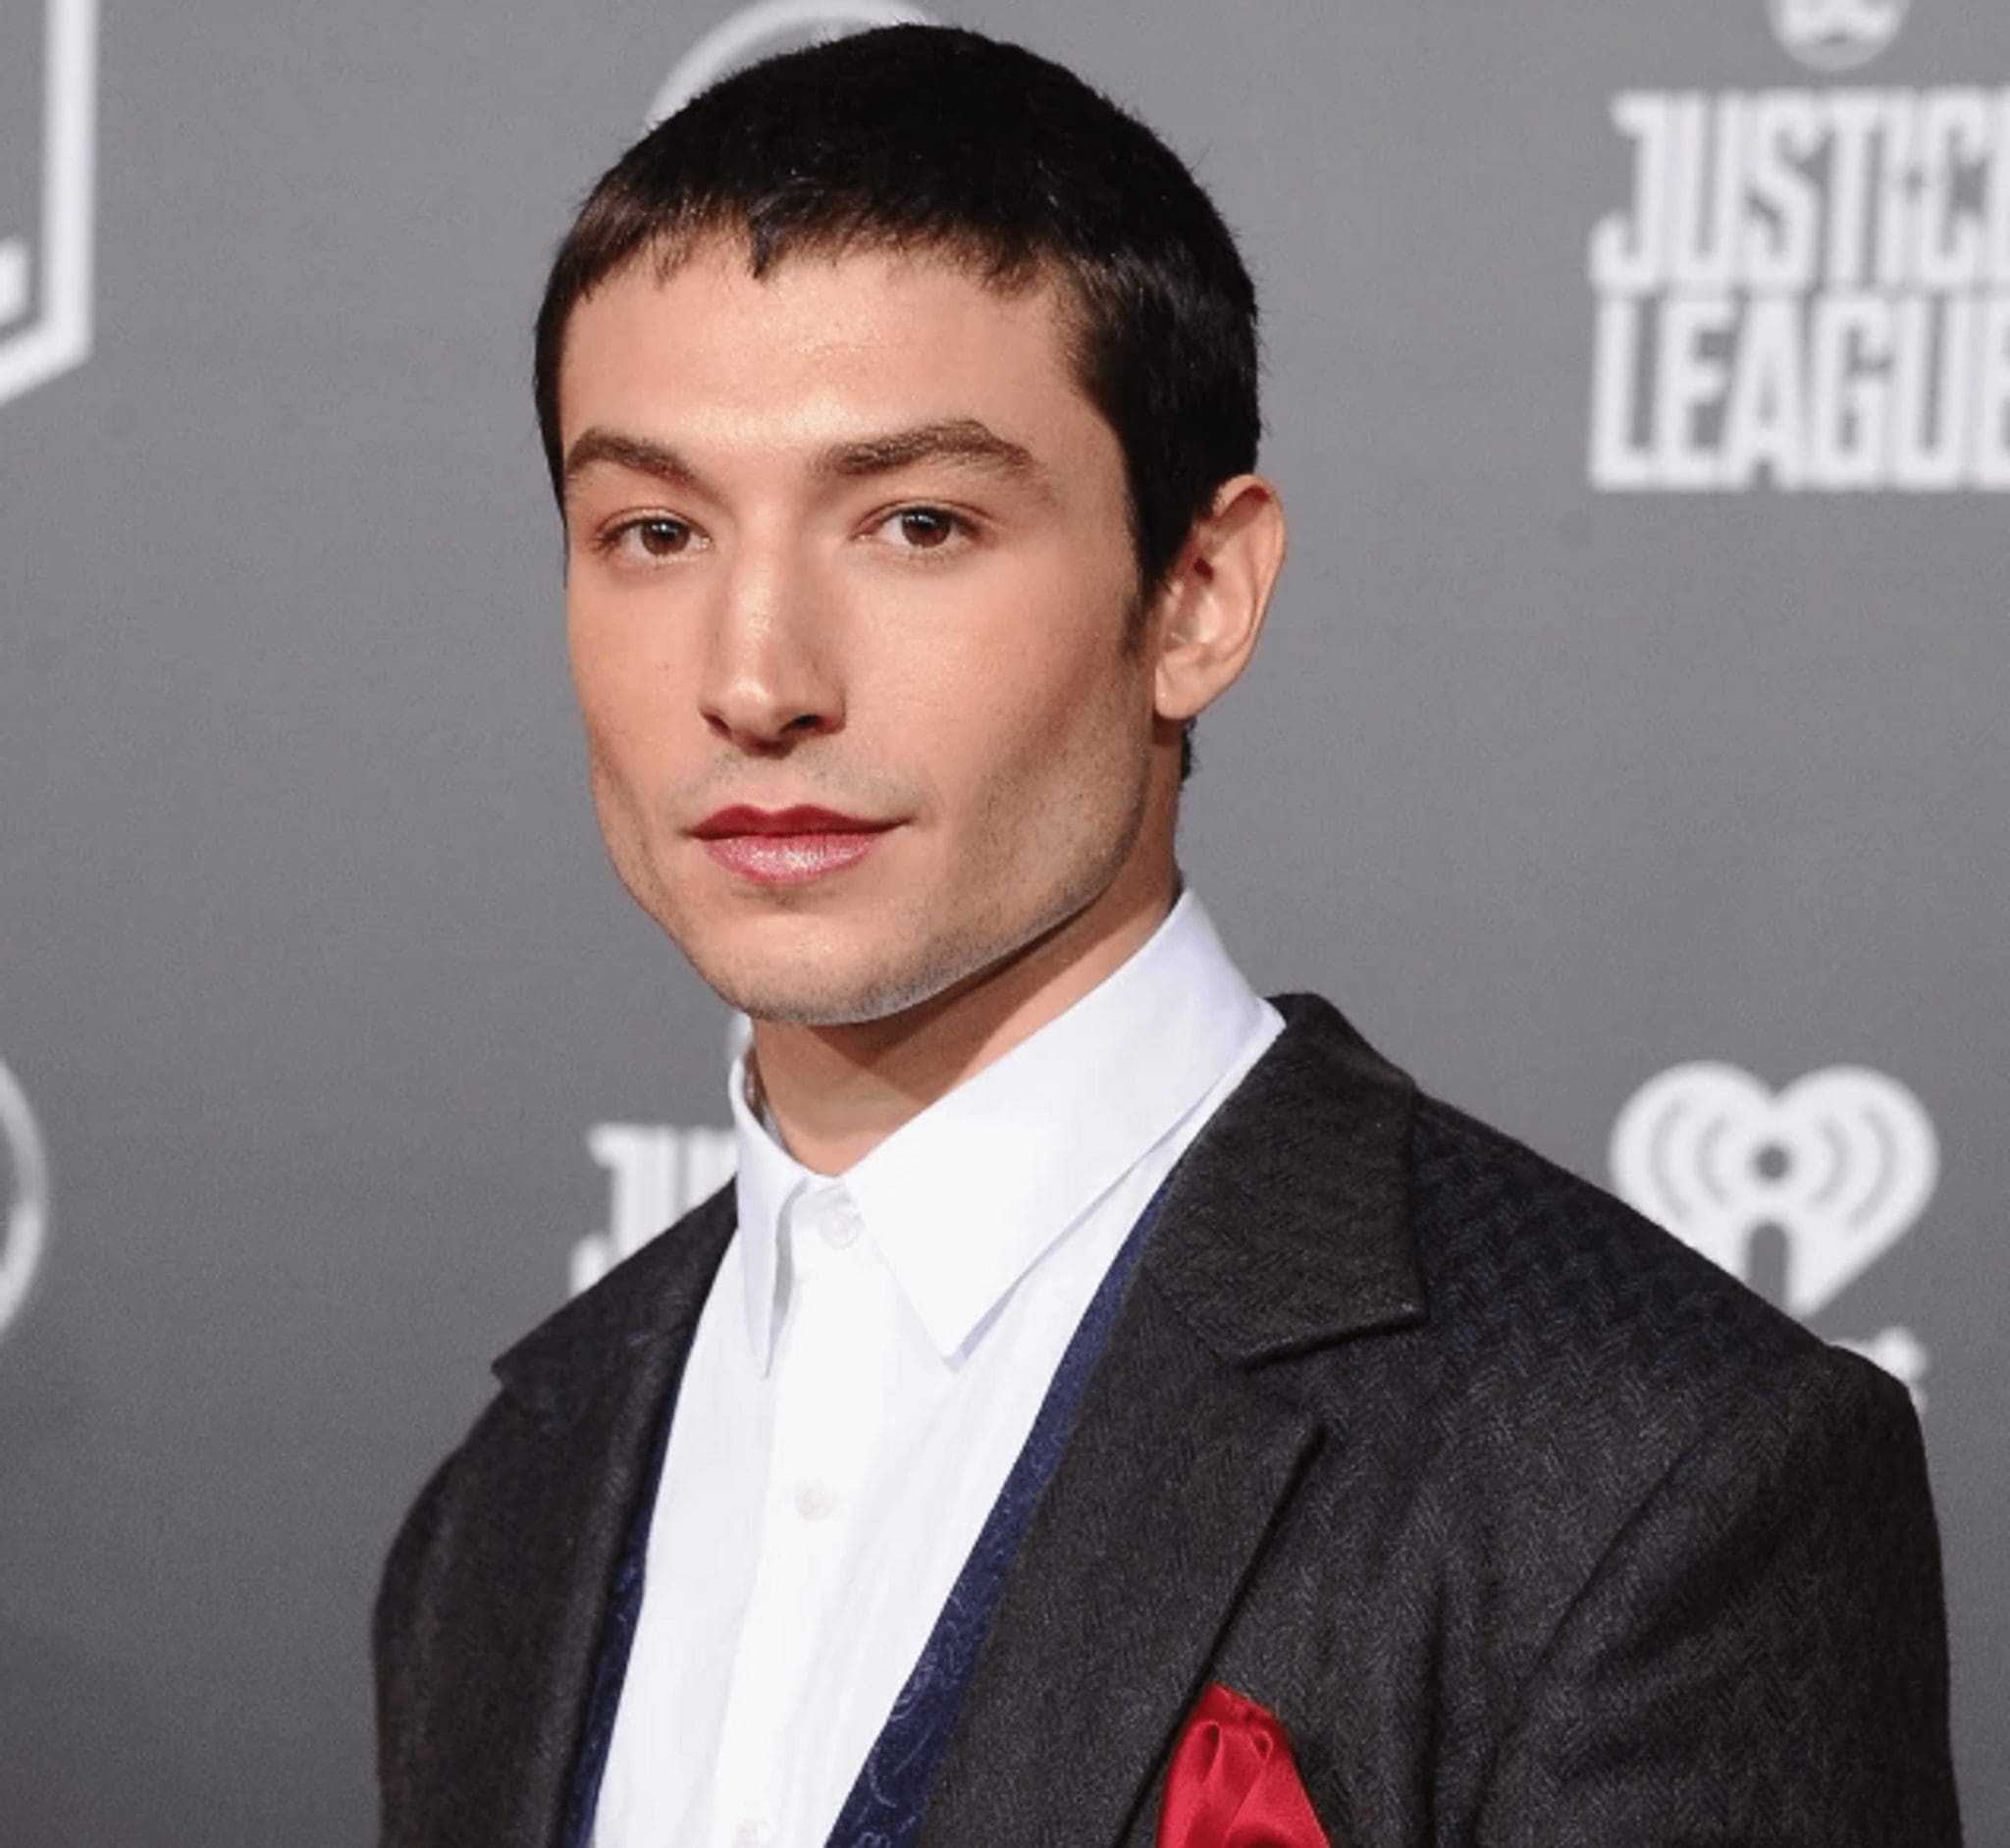 A resident of Germany accused the actor Ezra Miller of harassment